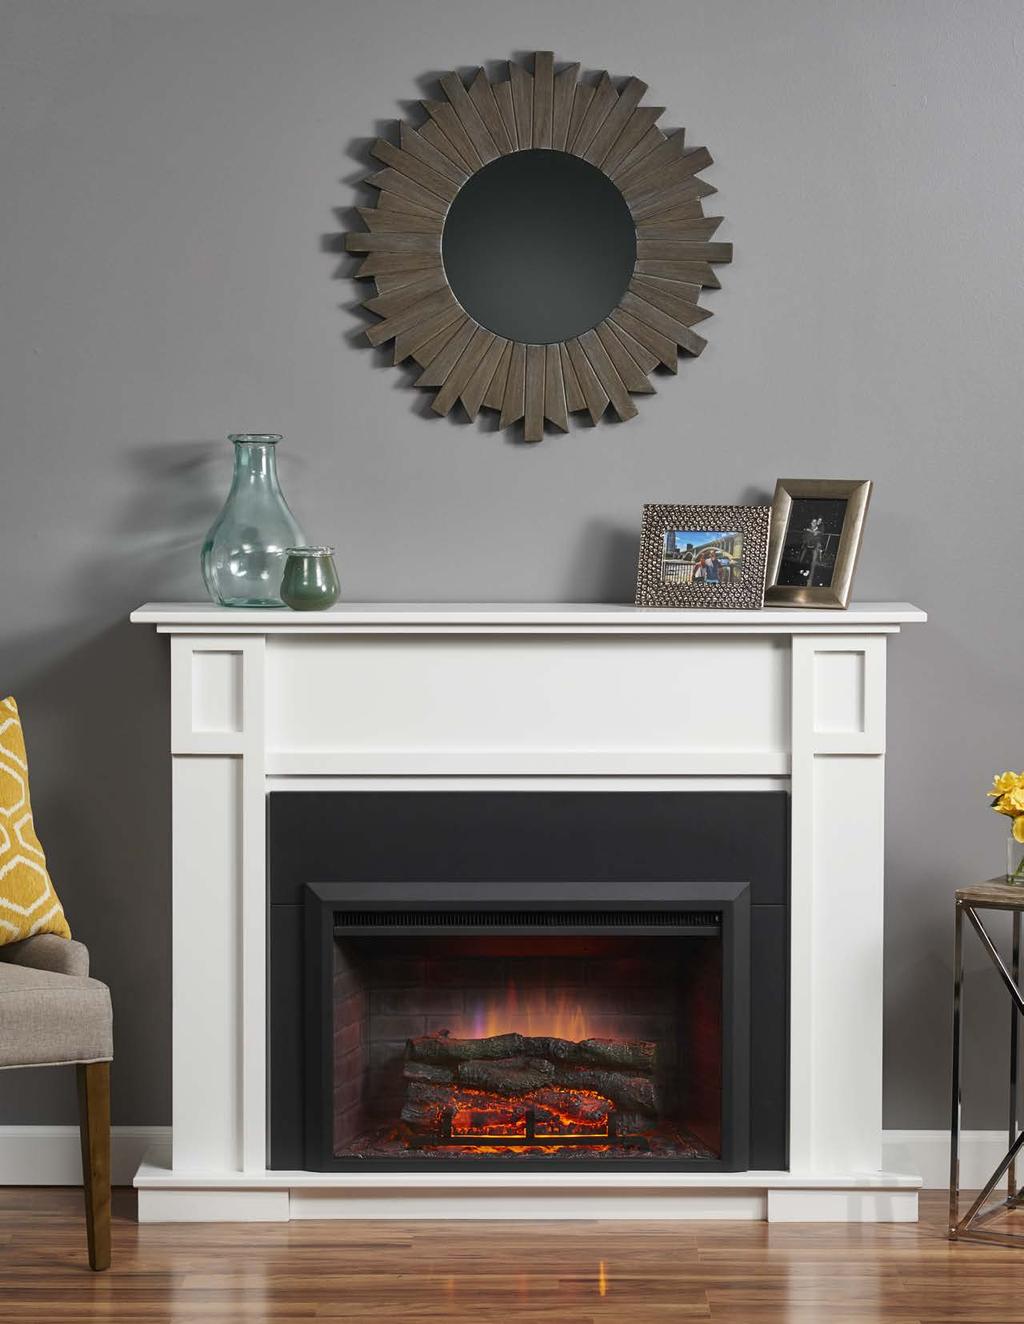 gallery collection indoor fireplaces Just plug in one of our electric fireplaces for instant ambiance in any room.